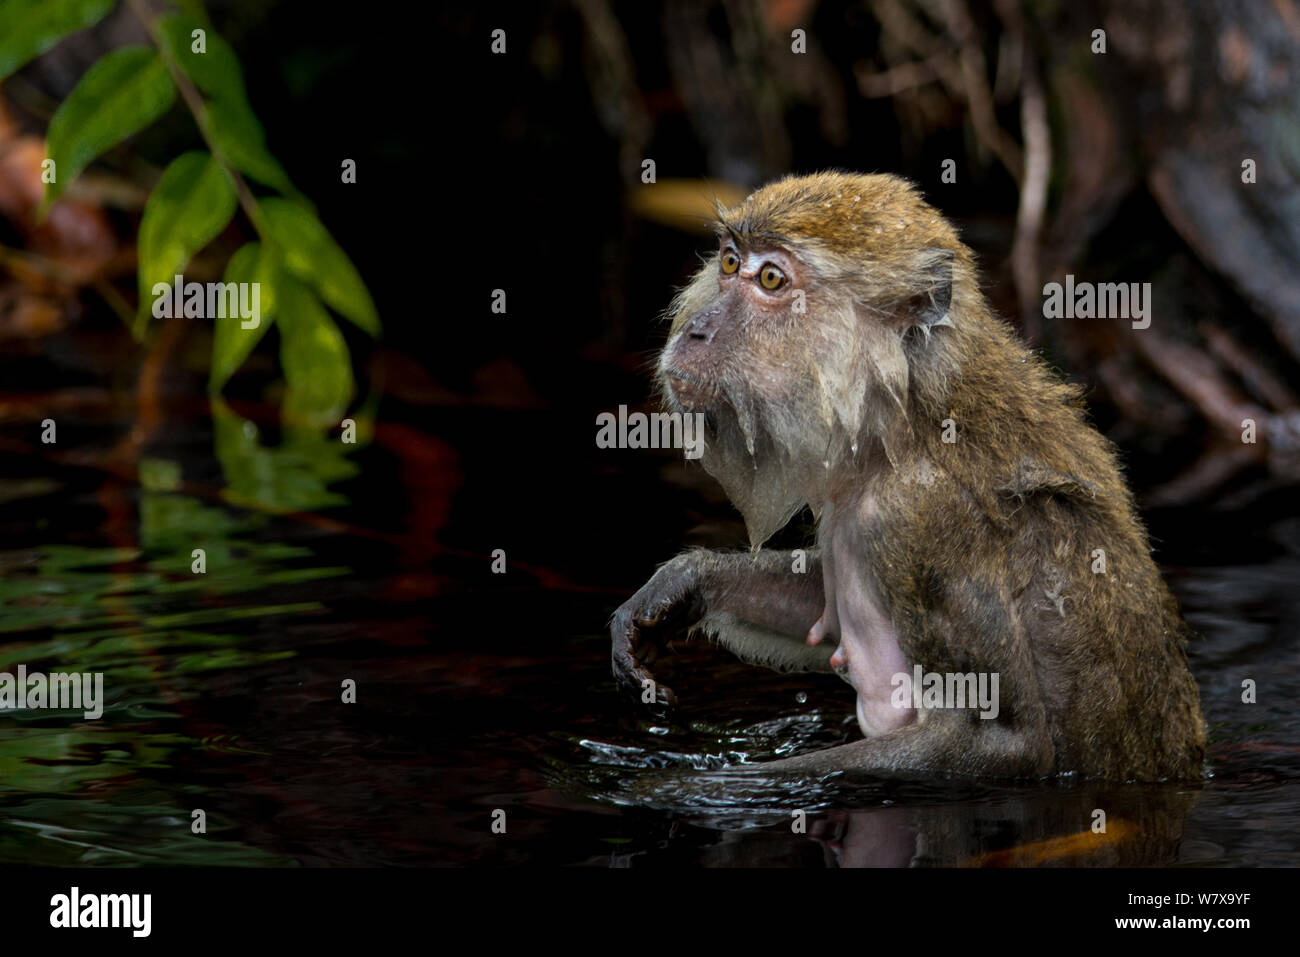 Long-tailed Macaque (Macaca fascicularis) in water, Tanjung Puting National Park, Borneo, Indonesia. Stock Photo